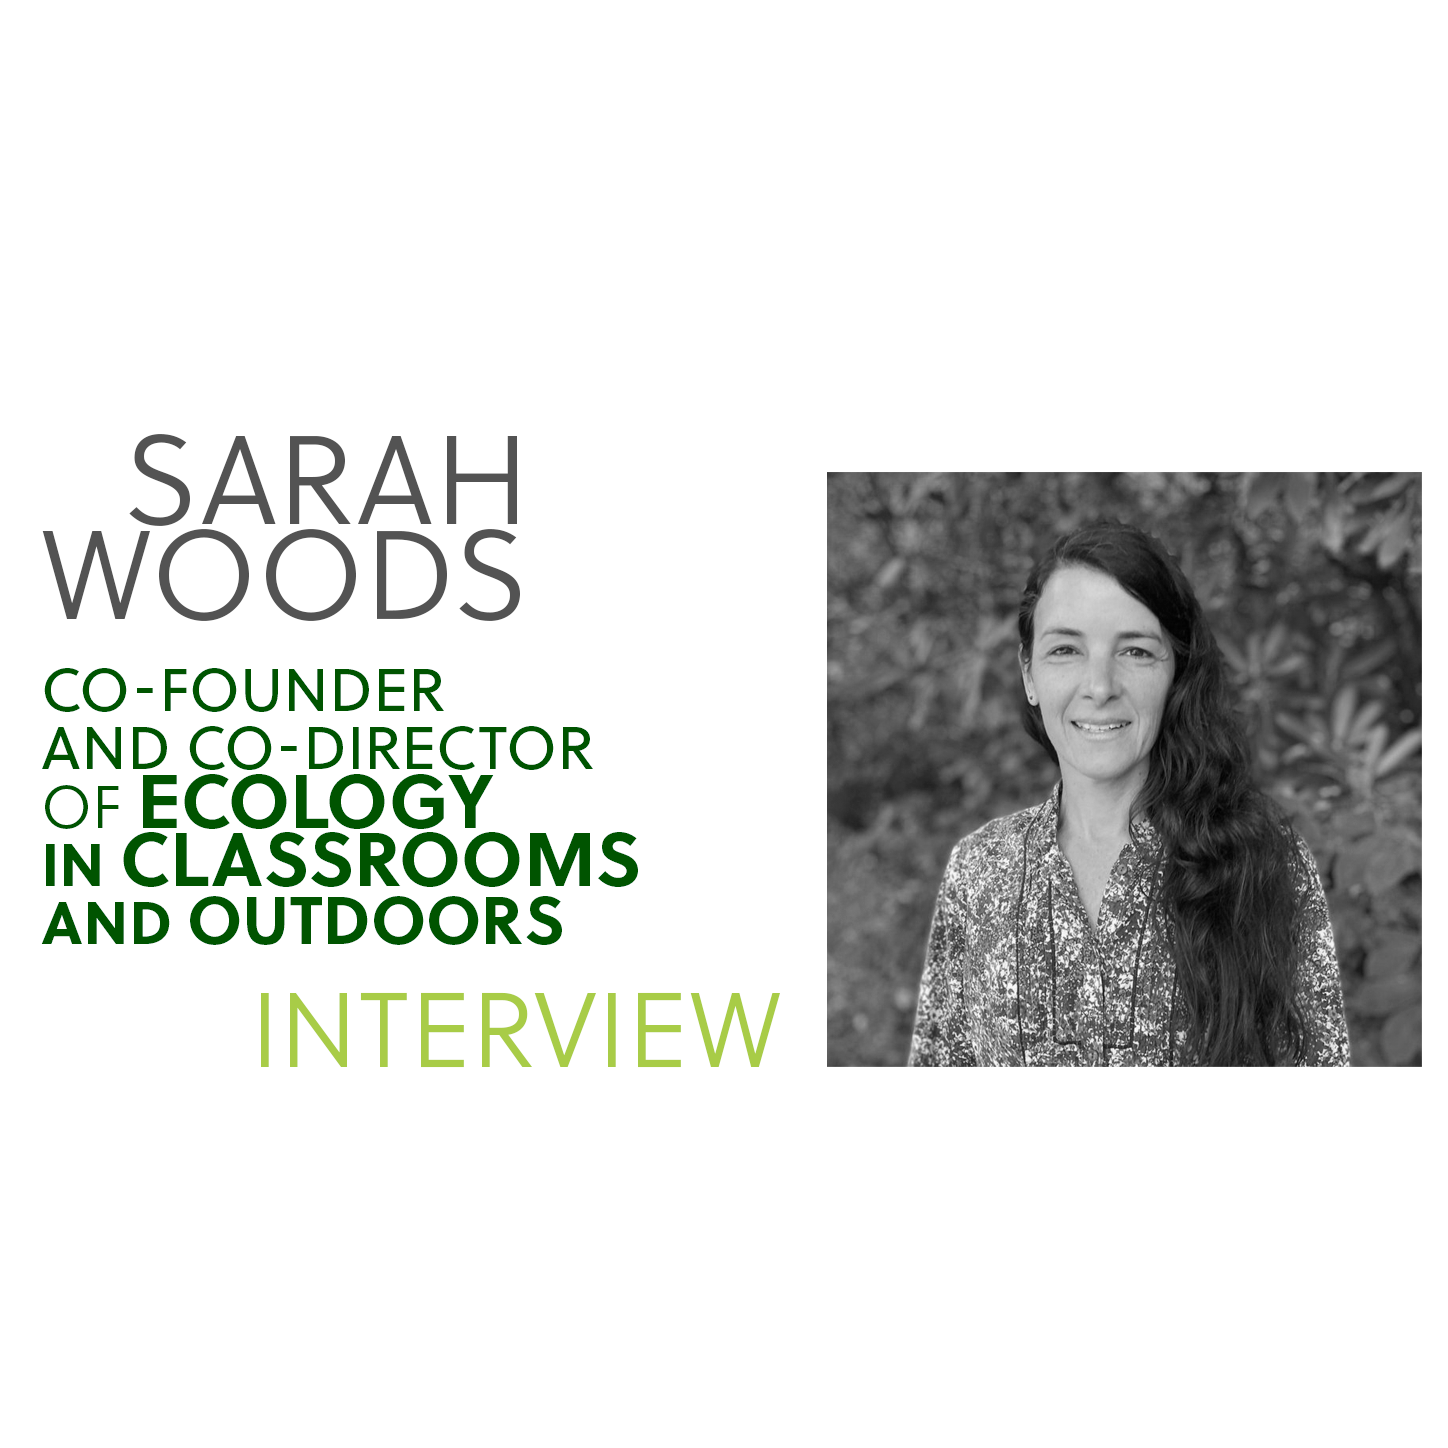 We work to gain teachers' trust, says Sarah Woods, founder of ECO, at a very special interview for This is My Earth.